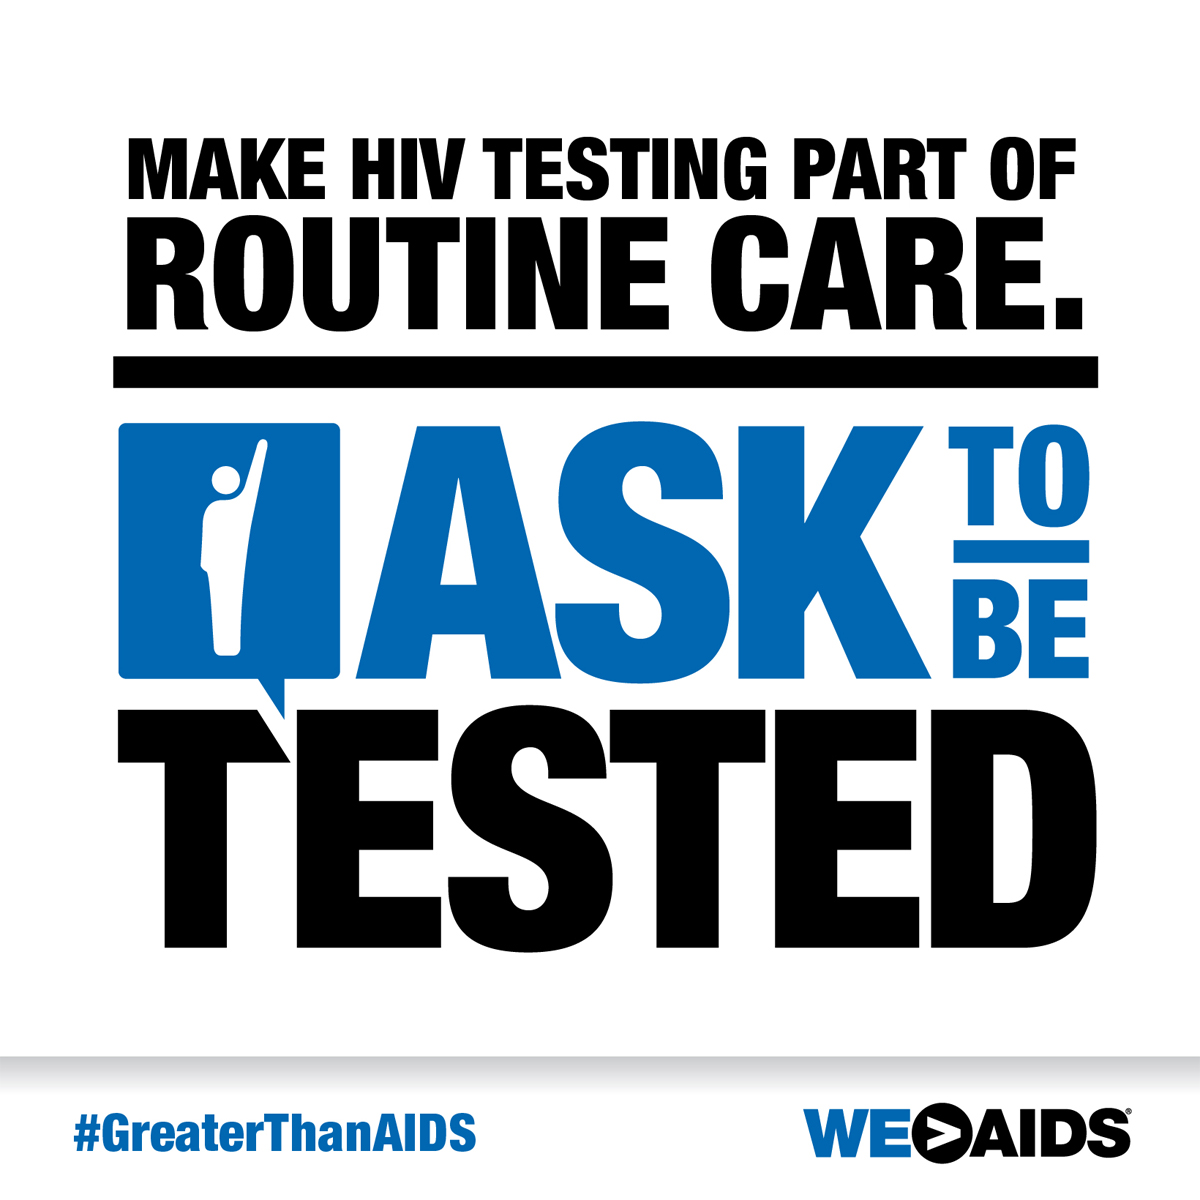 Greater Than AIDS Make HIV Testing Part of Routine Care. Ask to be tested Logo